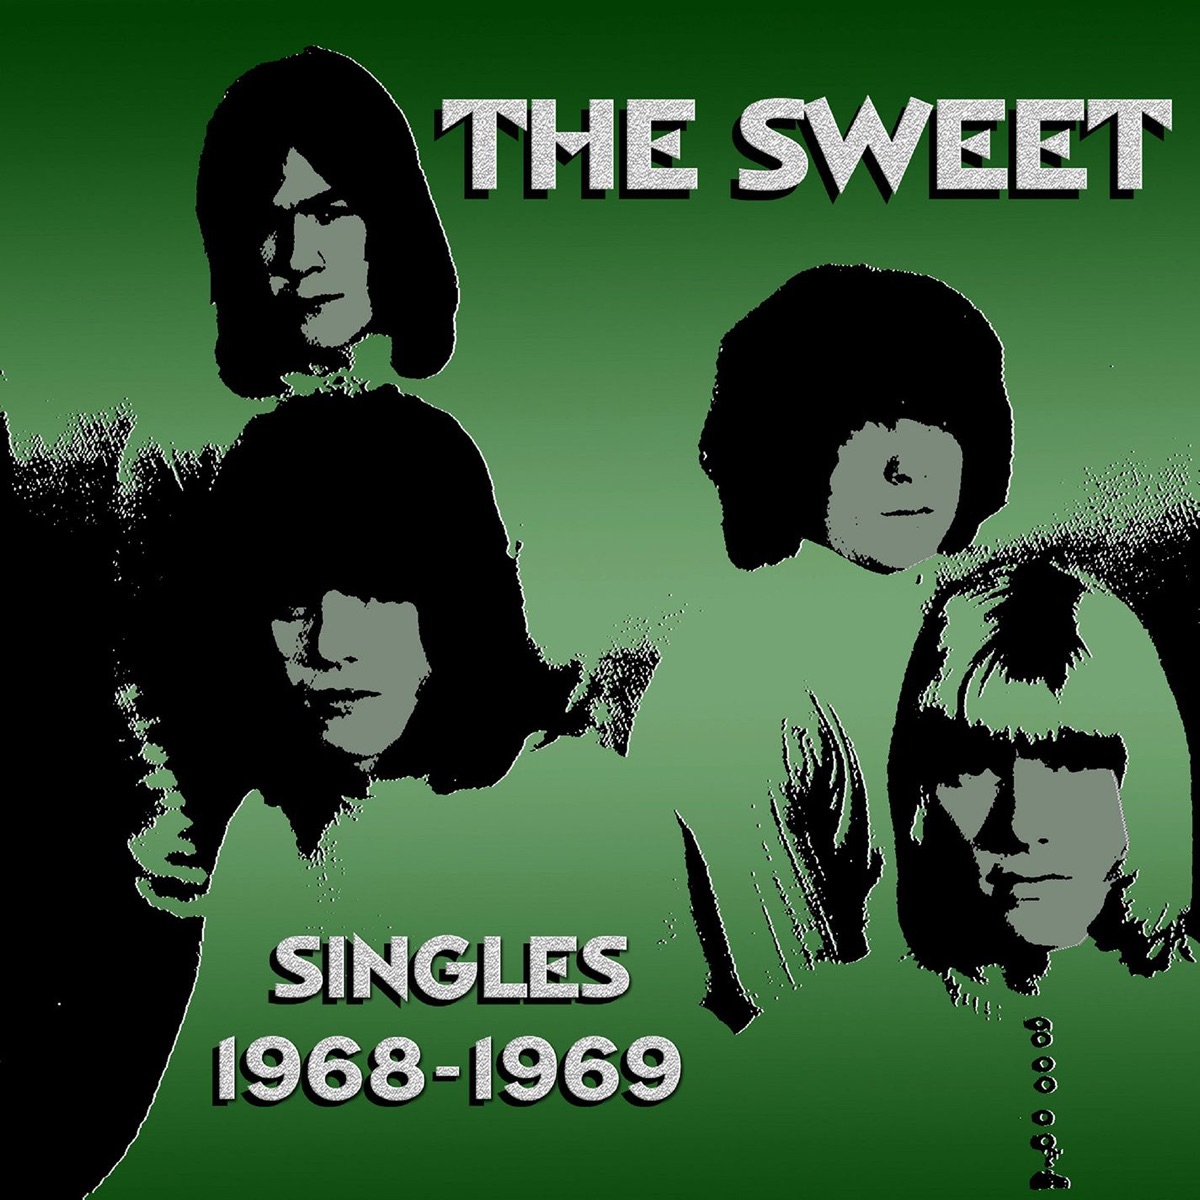 Perfecto si Juntar Ballroom Blitz - The Anthology by Sweet on Apple Music